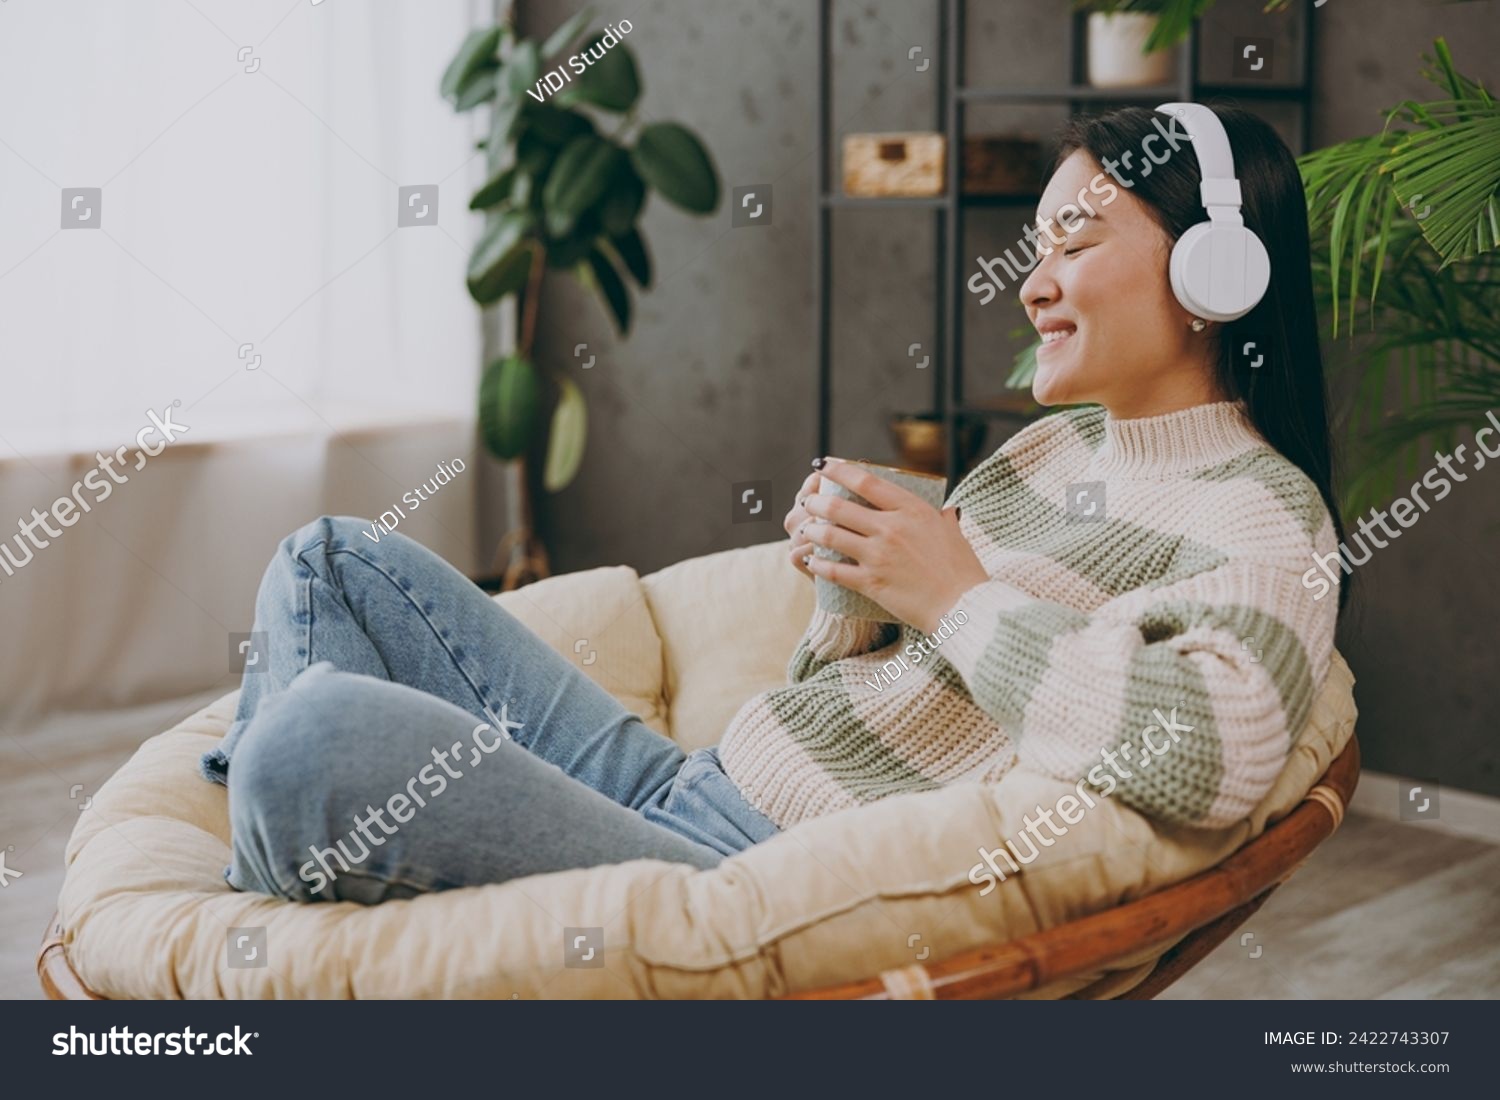 Full body young woman wears casual clothes listen to music in headphones drink tea sits on armchair stay at home hotel flat rest relax spend free spare time in grey living room indoor. Lounge concept #2422743307